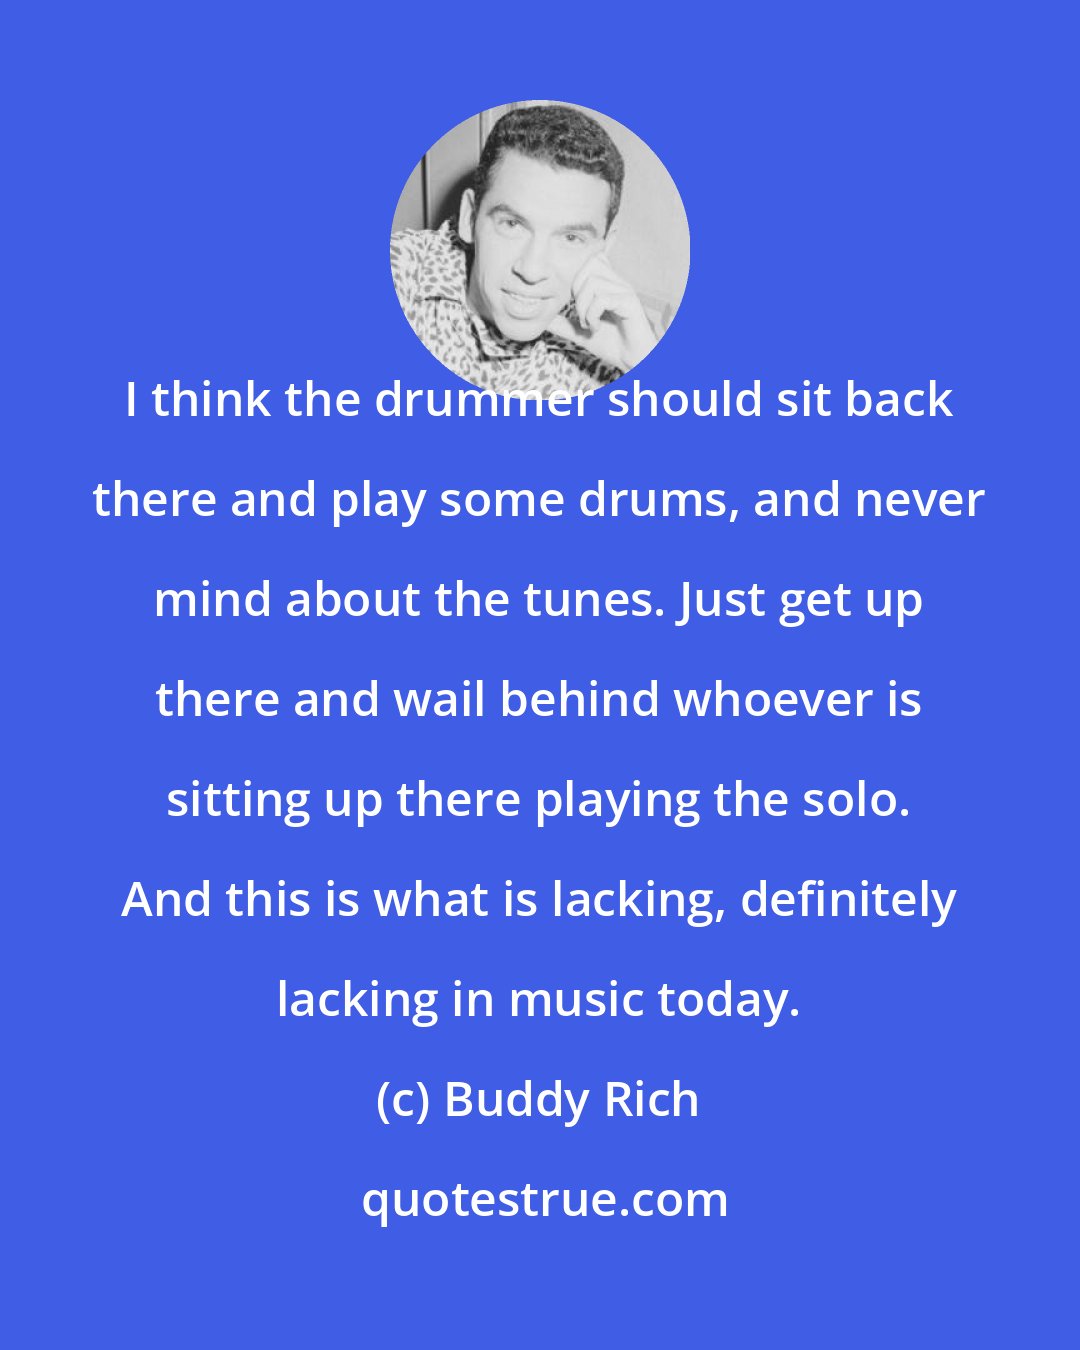 Buddy Rich: I think the drummer should sit back there and play some drums, and never mind about the tunes. Just get up there and wail behind whoever is sitting up there playing the solo. And this is what is lacking, definitely lacking in music today.